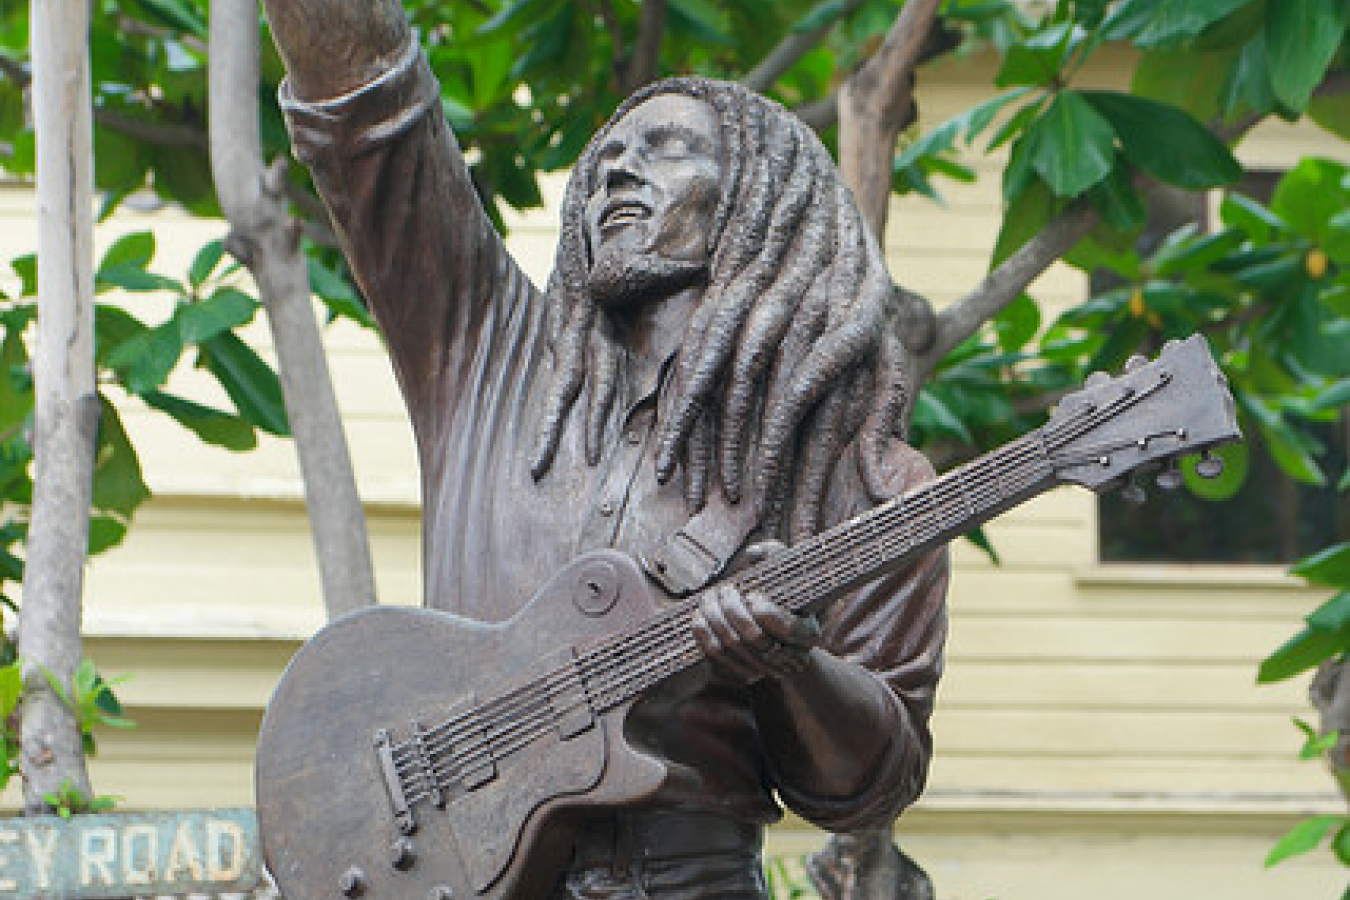 Bob Marley Museum - He was from Jamaica